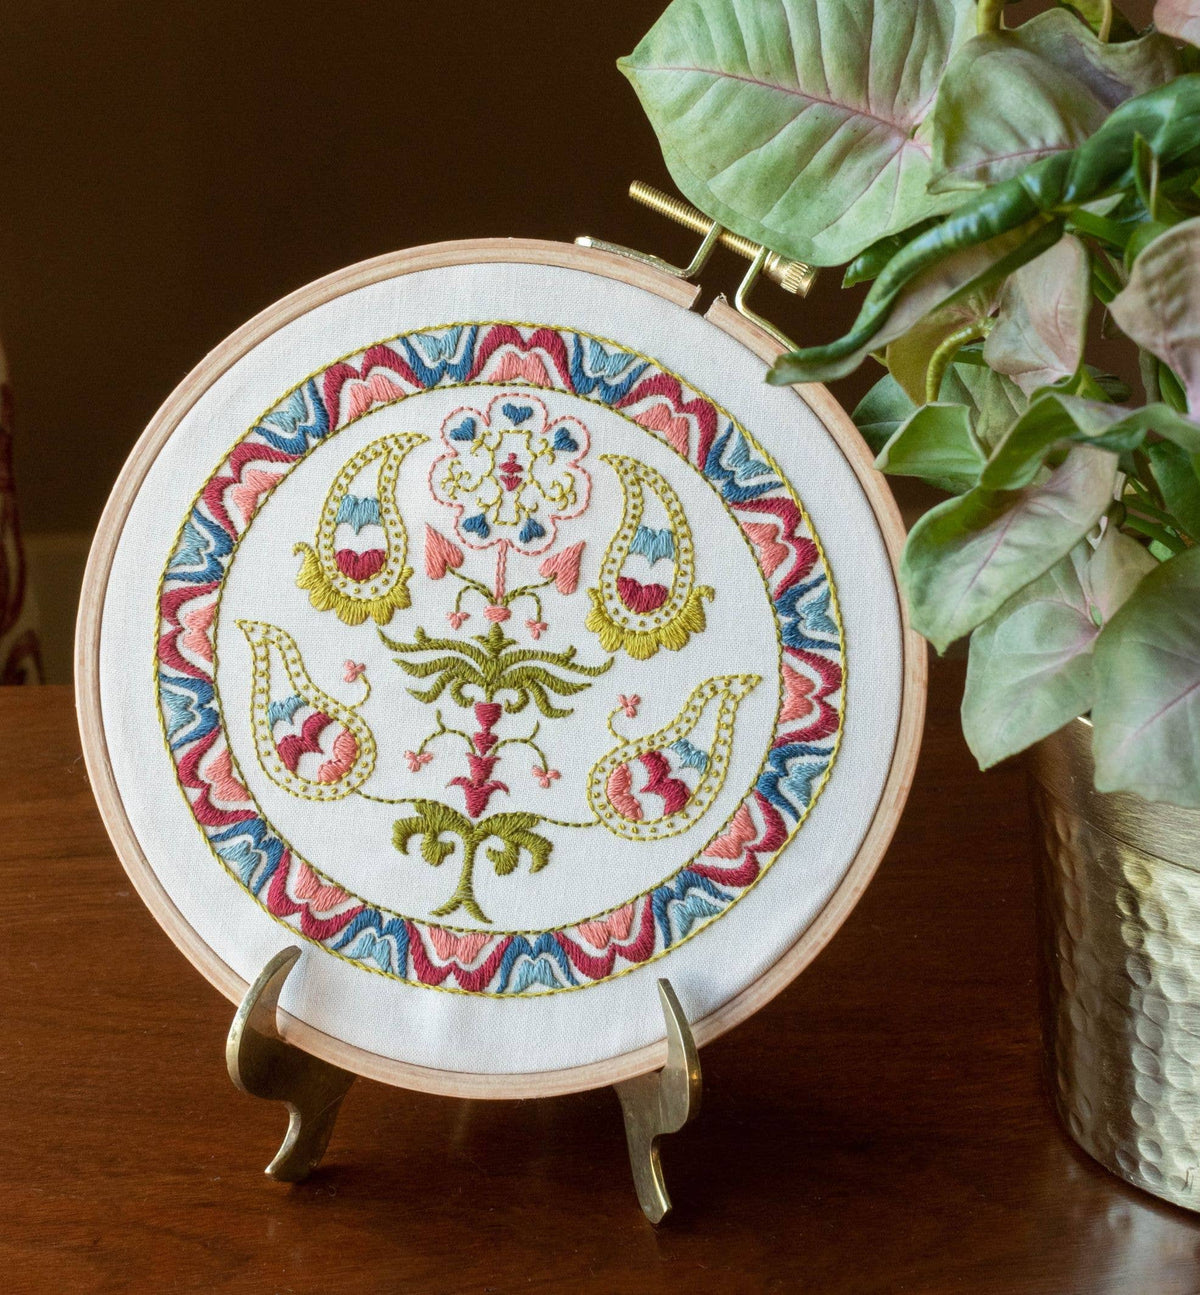 Tree of Life Embroidery Kit by Avlea Folk Embroidery